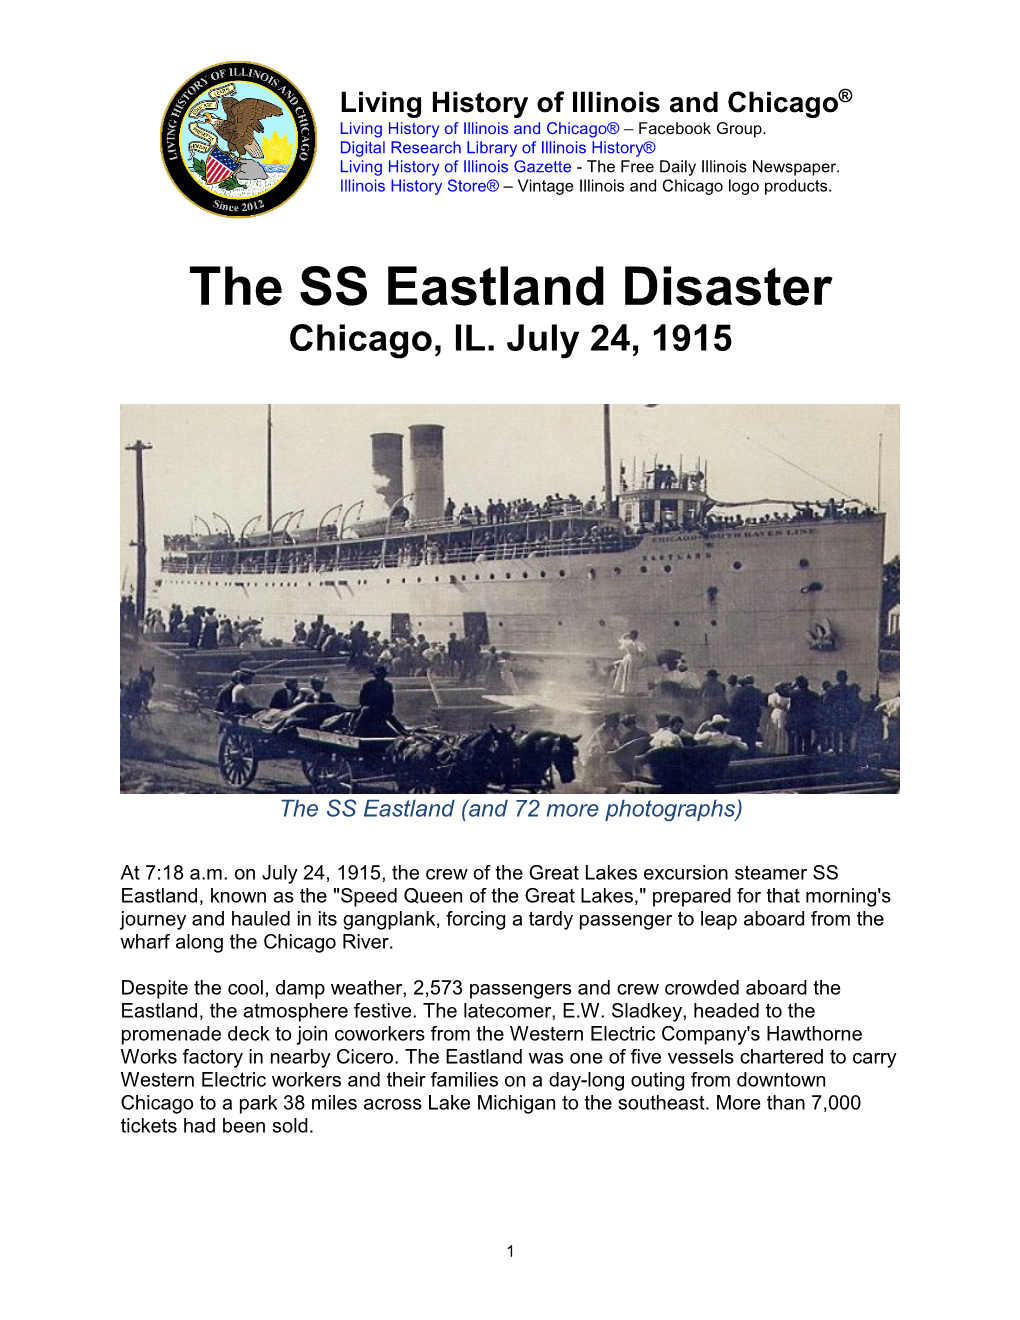 Eastland Disaster, Chicago, Illinois, on July 24, 1915